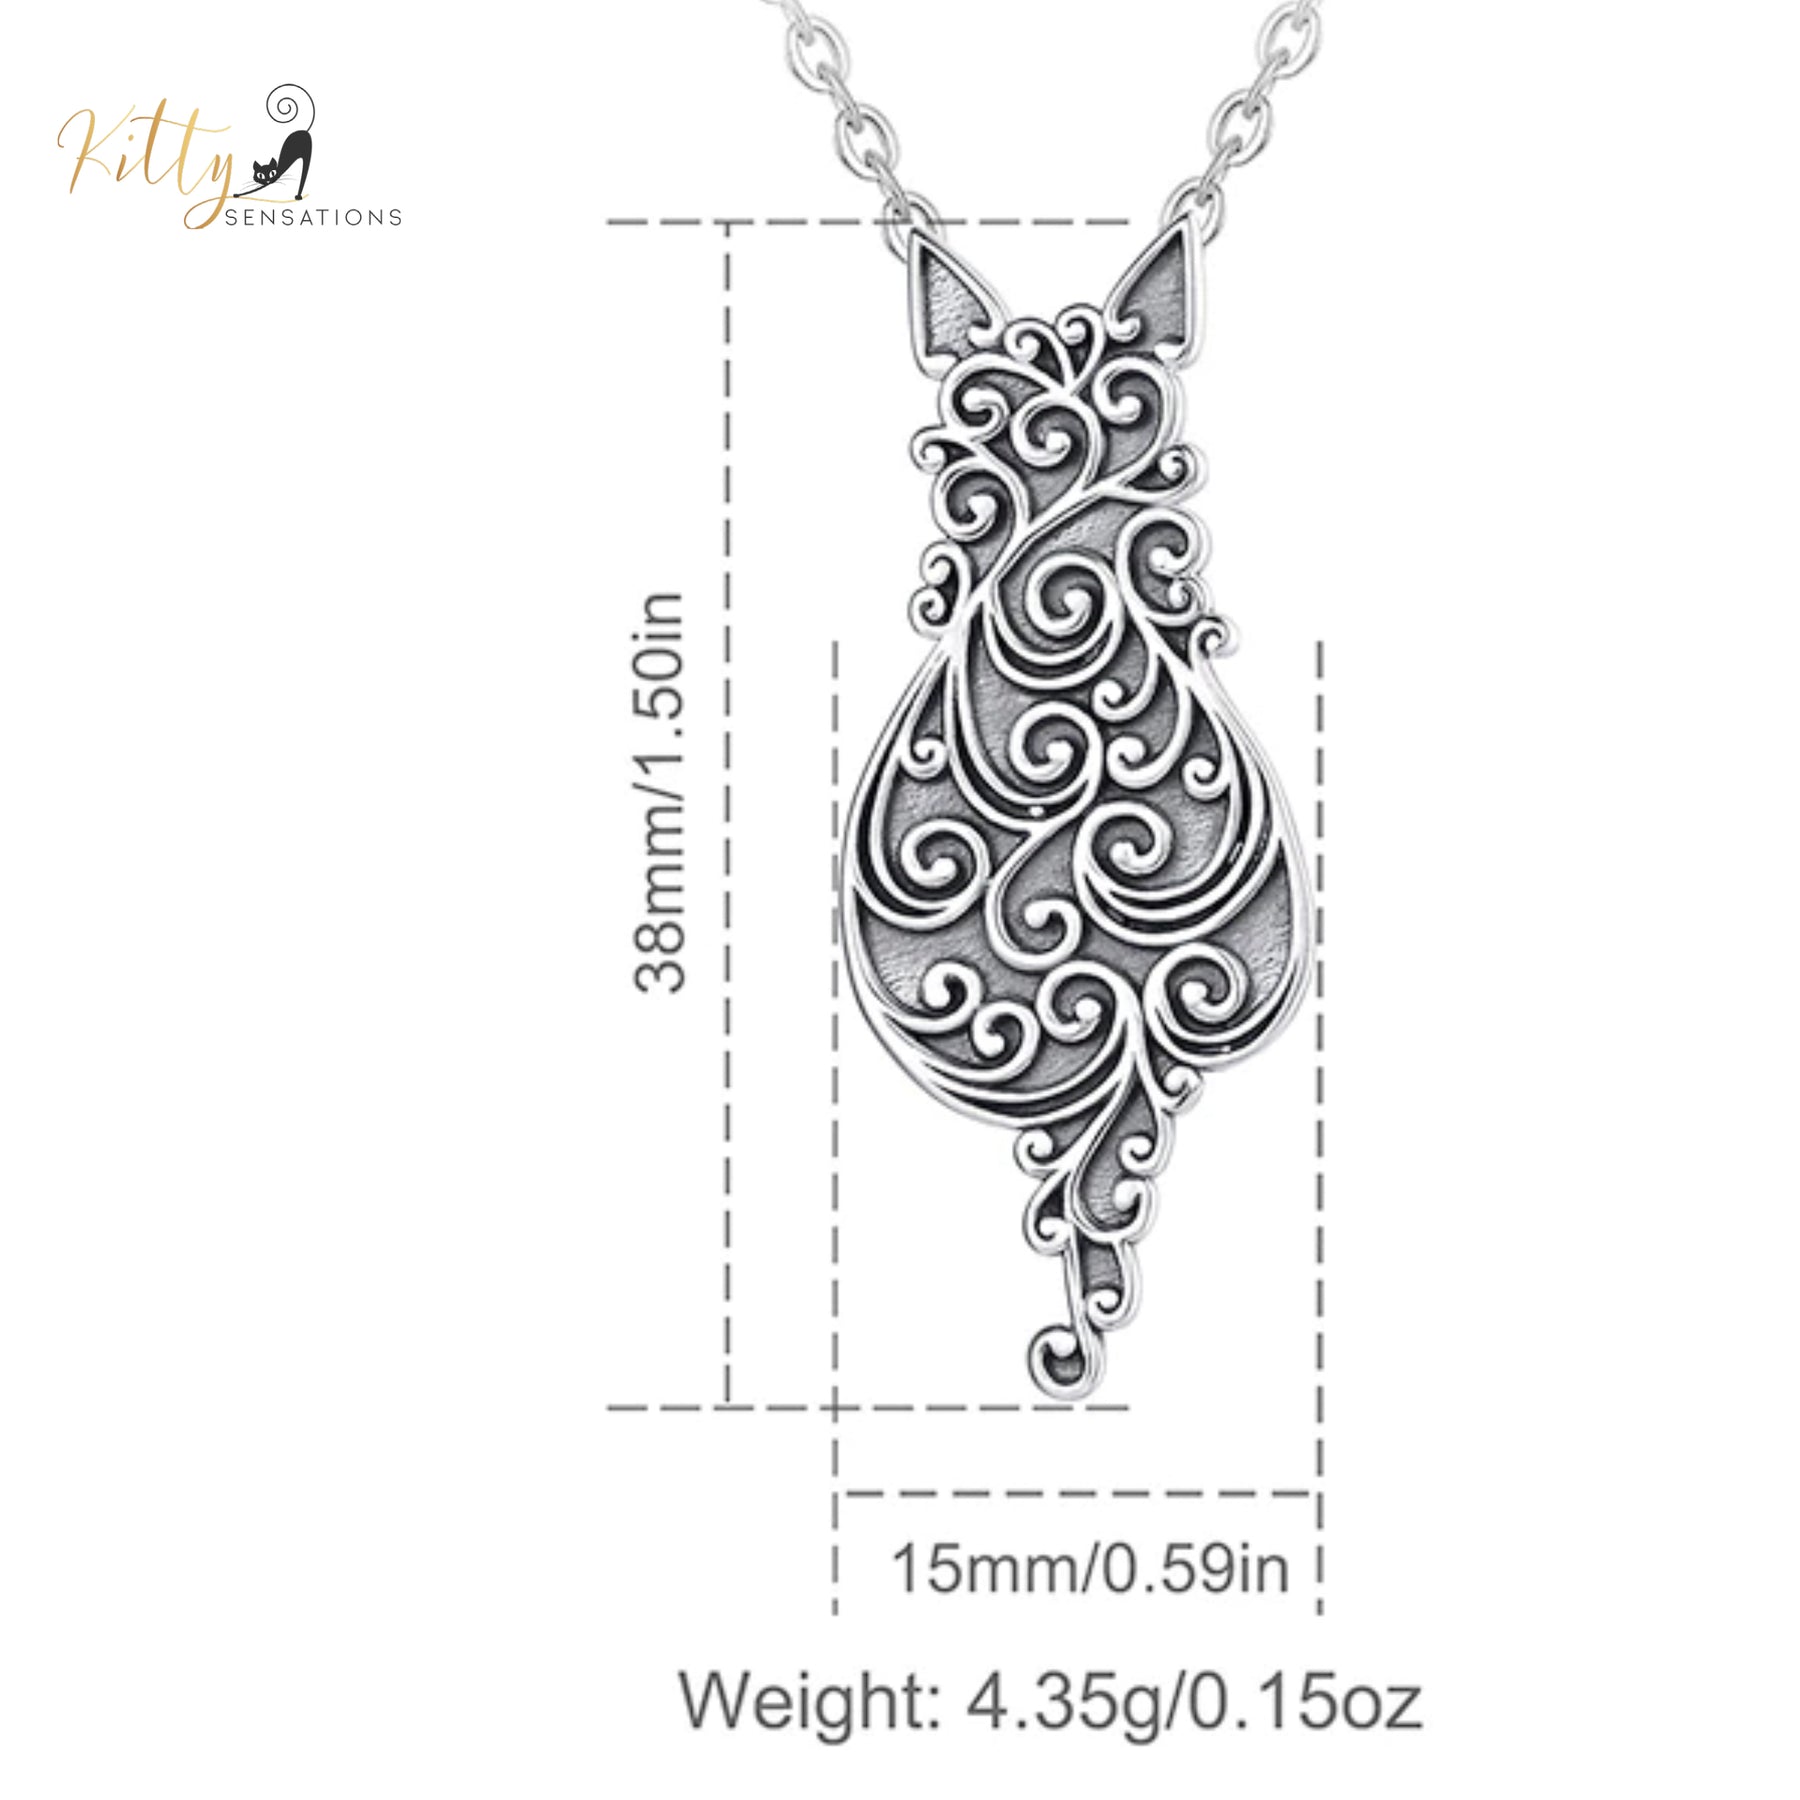 http://KittySensations.com Filigree Cat Over Solid 925 Sterling Silver Cat Necklace ($103.84): https://kittysensations.com/products/filigree-cat-over-solid-925-sterling-silver-cat-necklace